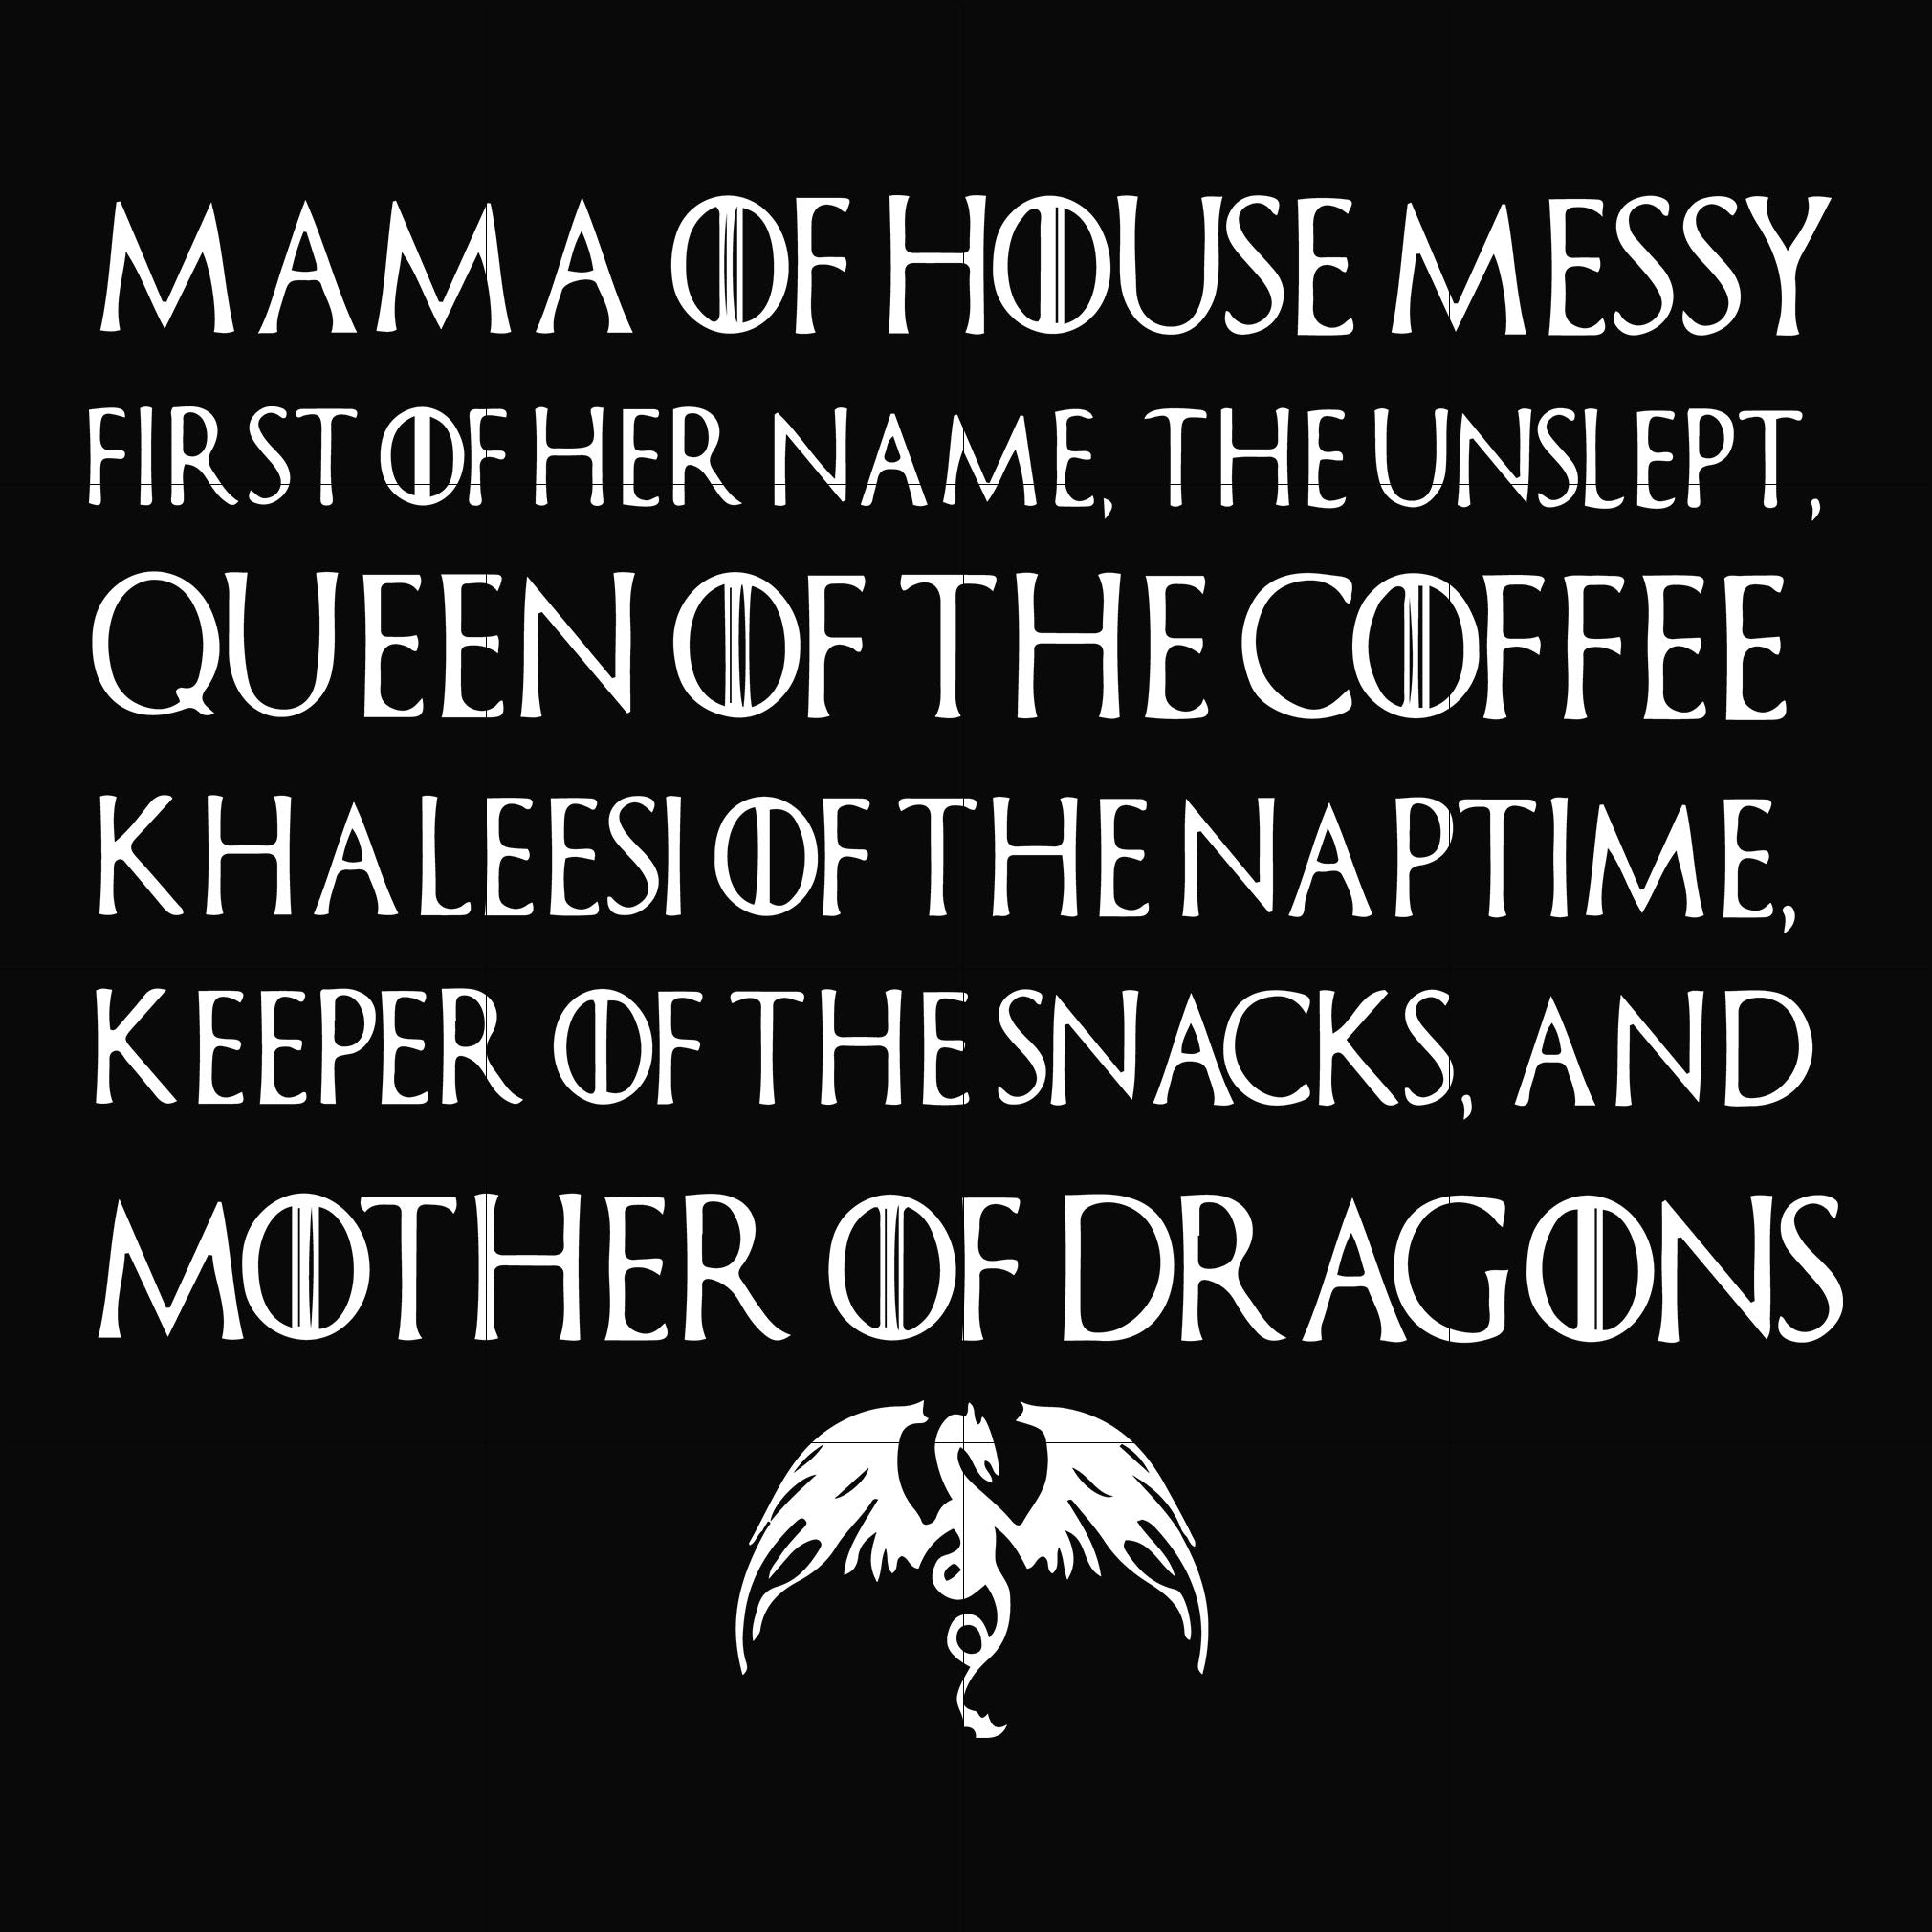 Download Mama Of House Messy Queen Of The Coffee Svg Png Dxf Eps File Fn0004 Dreamsvg Store